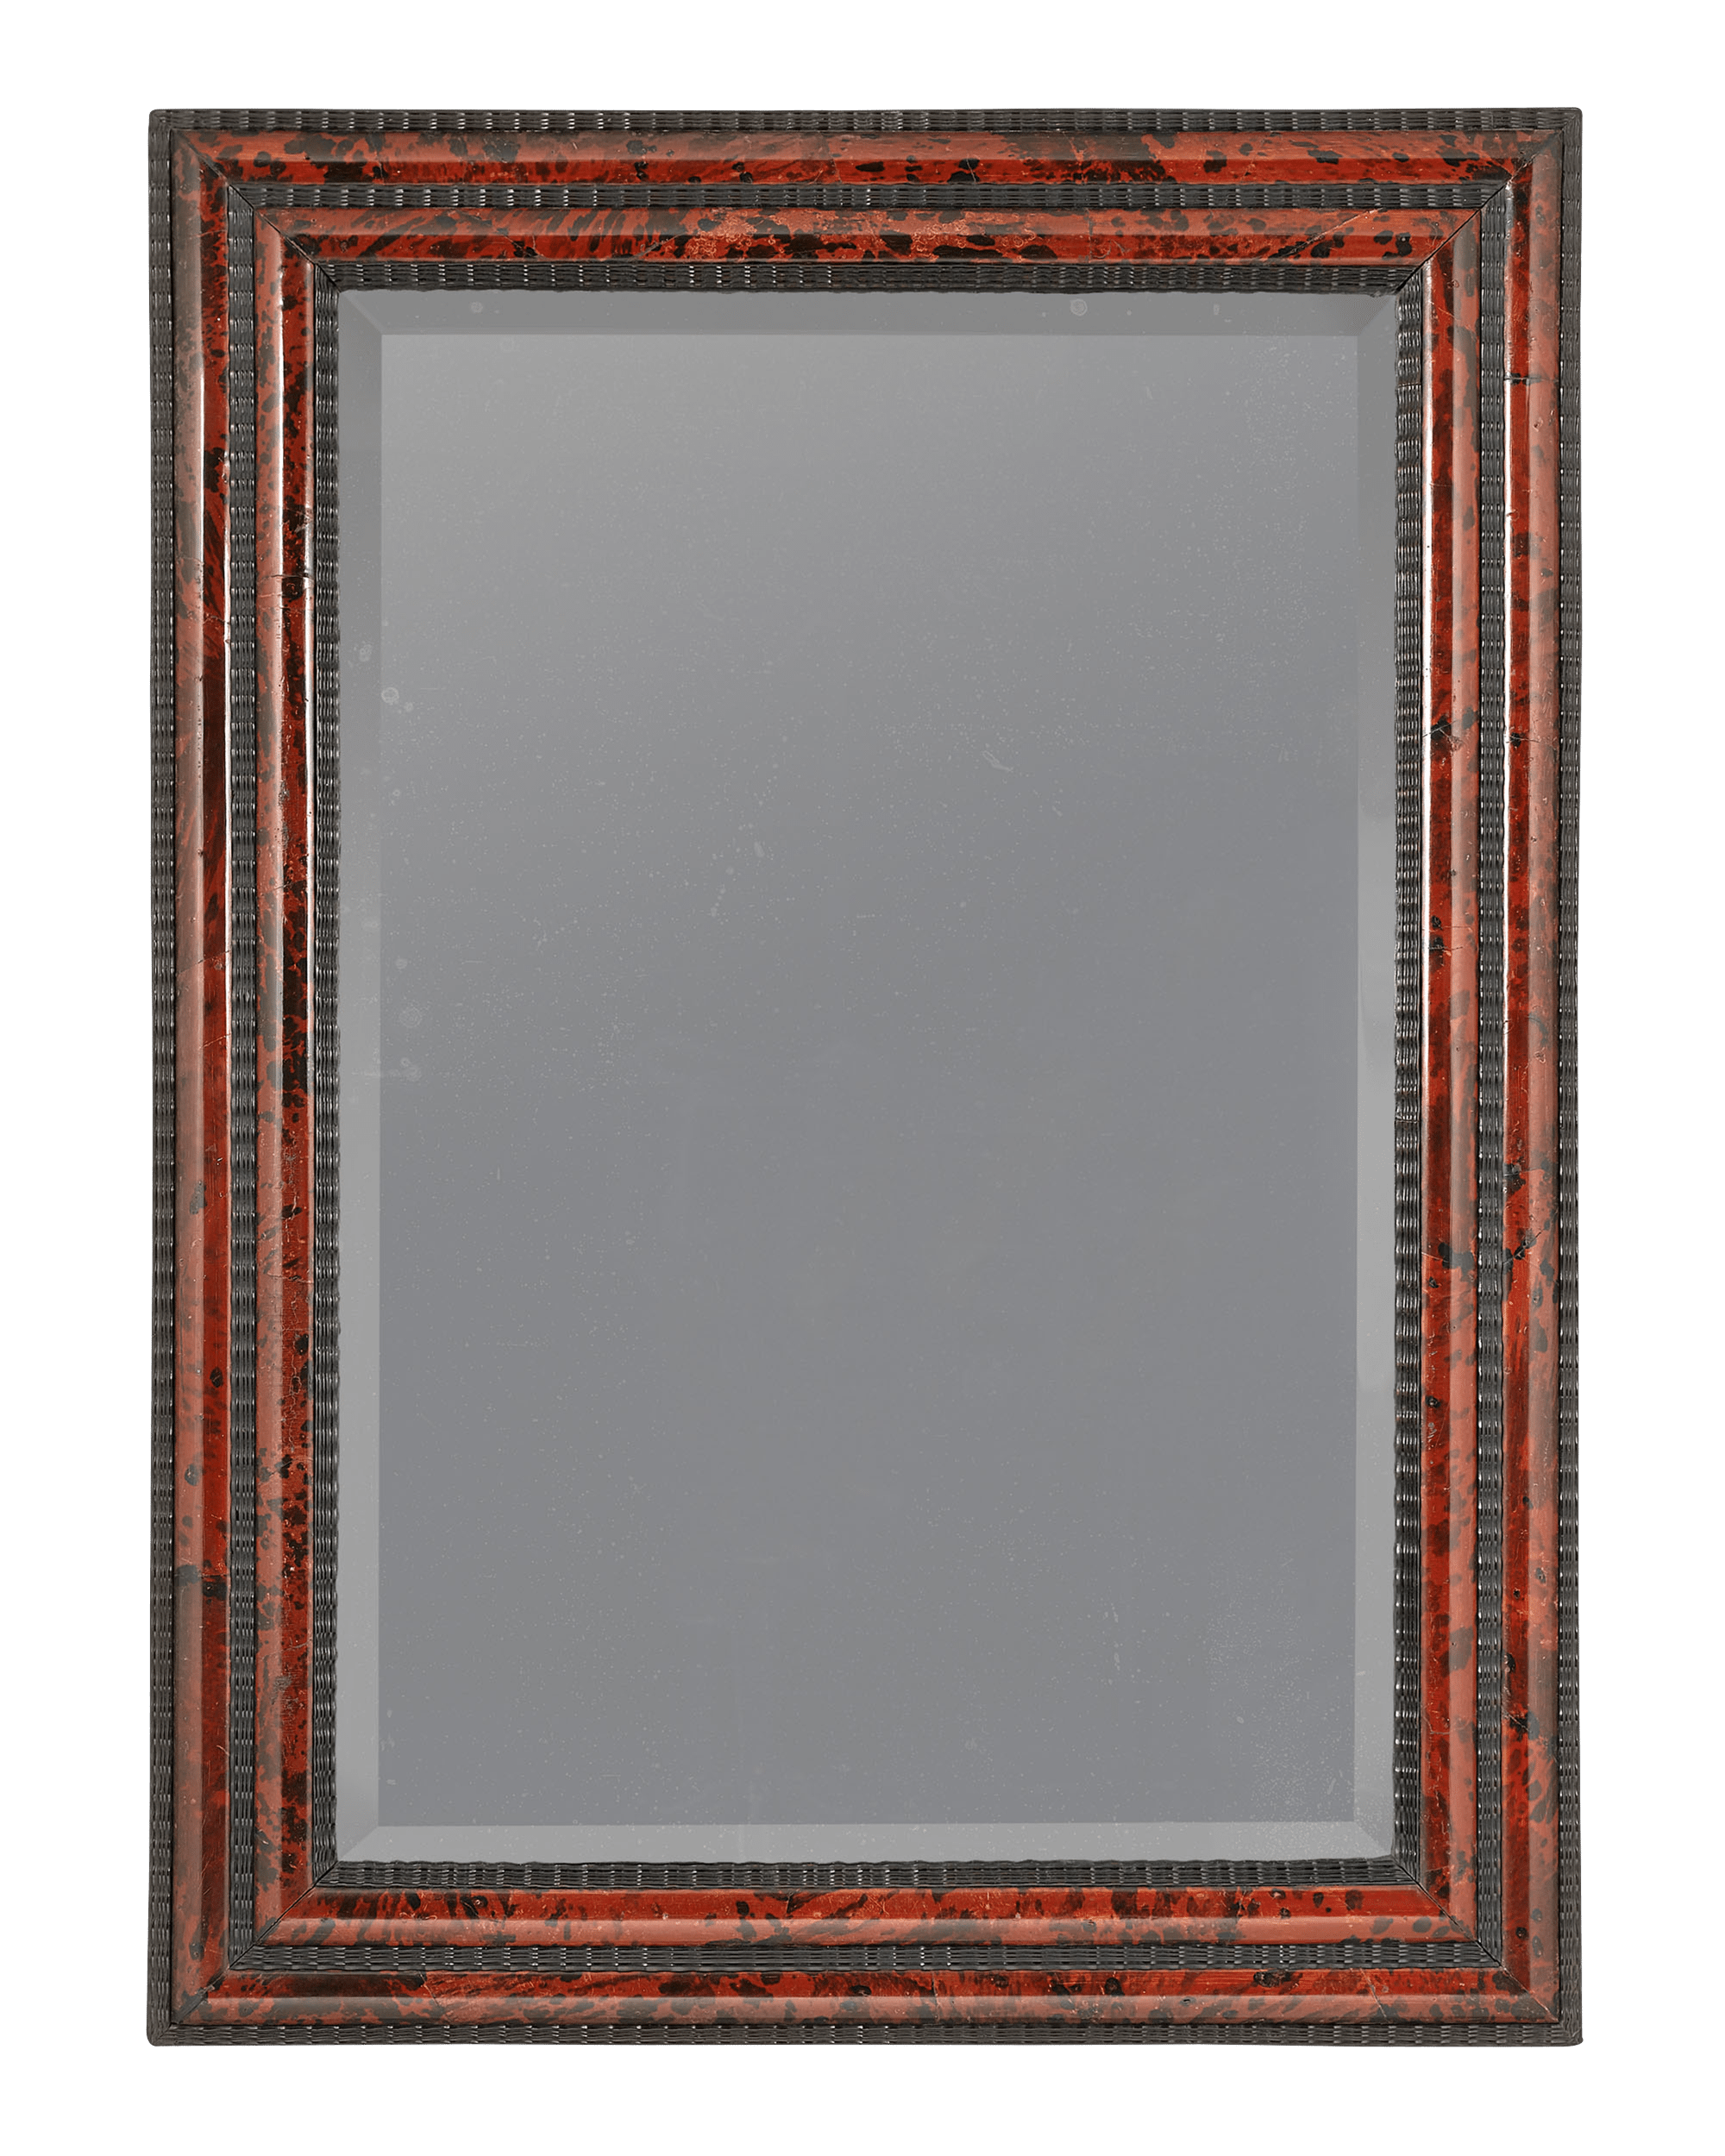 The frame of this rare Flemish Baroque-period mirror is clad in the finest tortoiseshell and ebony